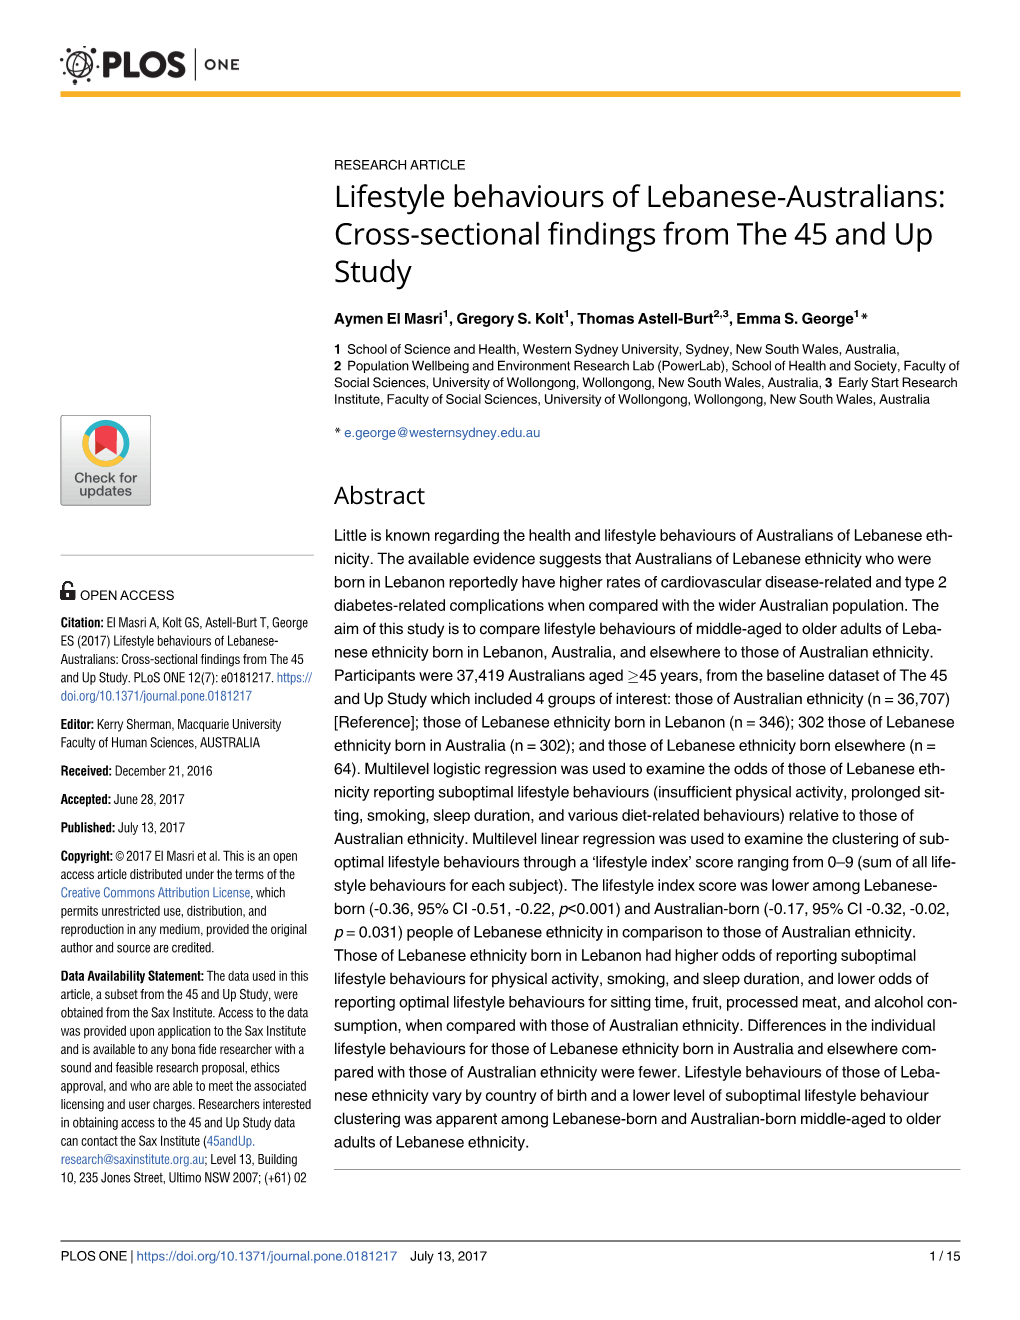 Lifestyle Behaviours of Lebanese-Australians: Cross-Sectional Findings from the 45 and up Study